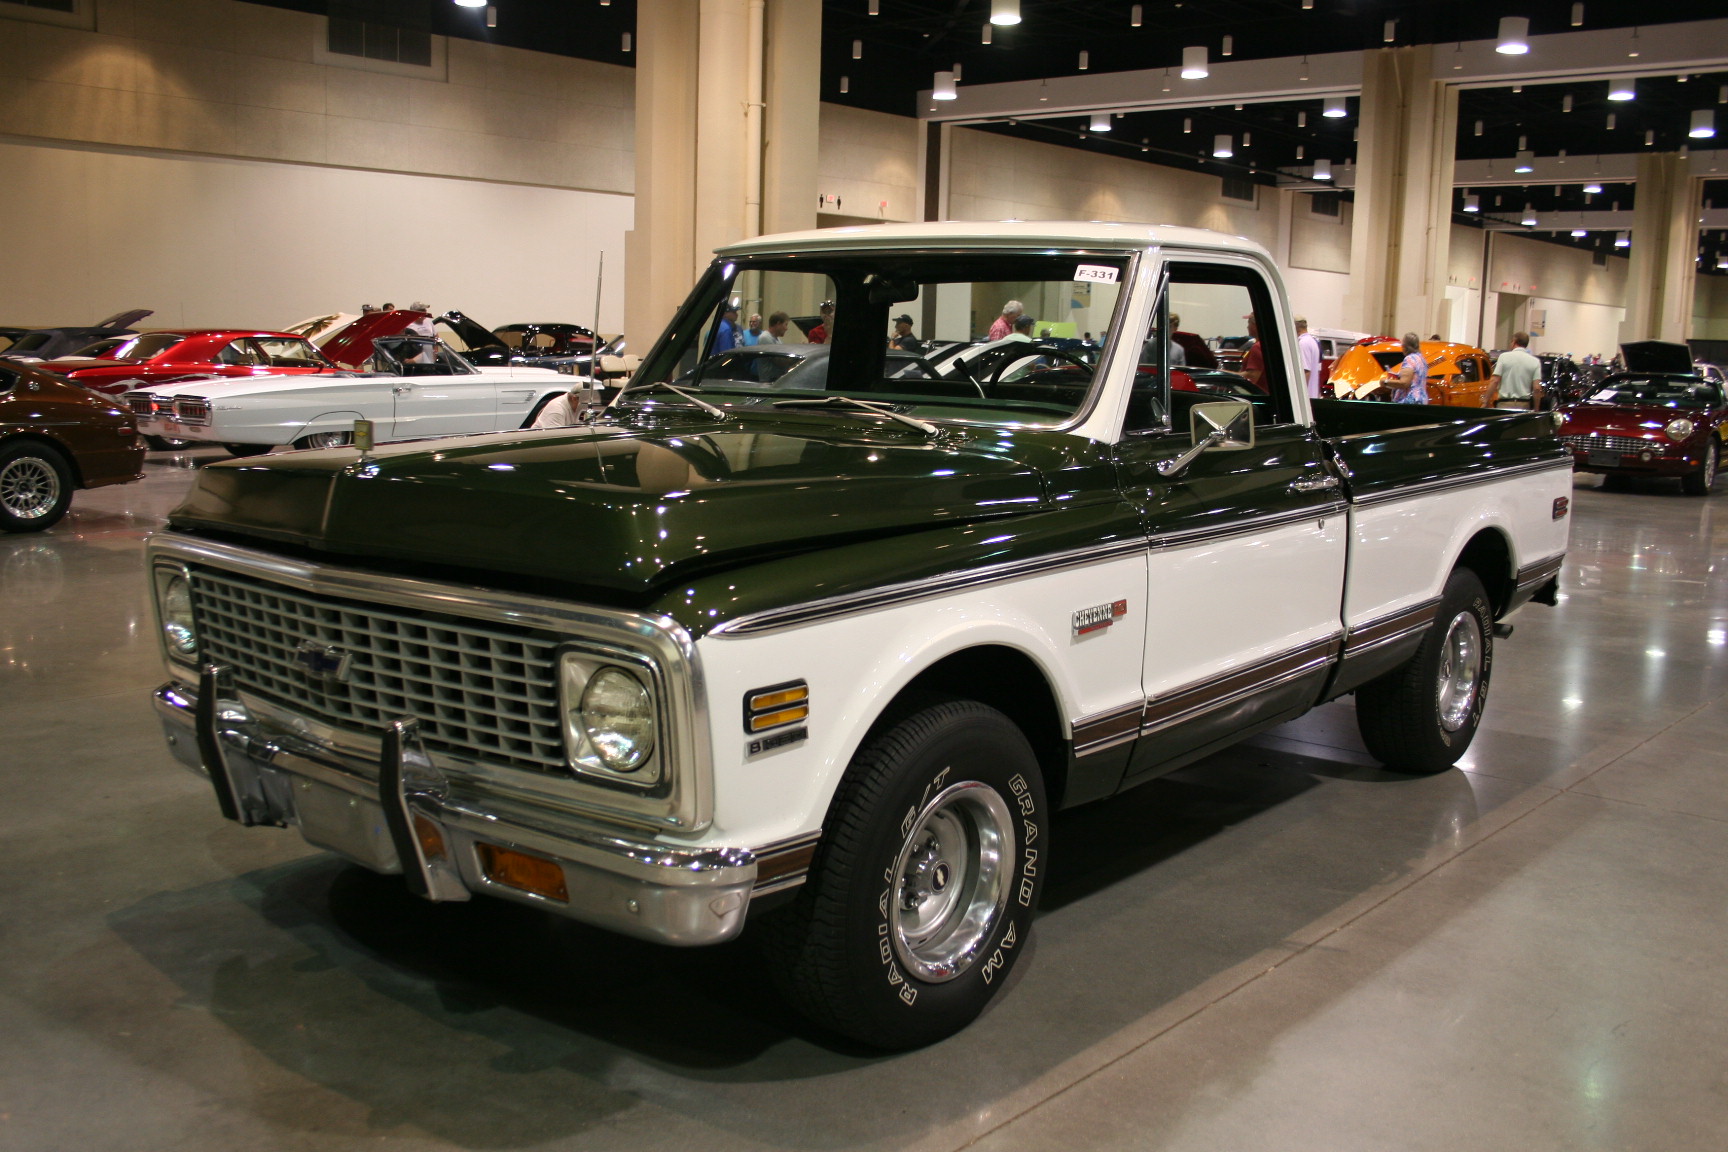 2nd Image of a 1972 CHEVROLET CHEYENNE SUPER